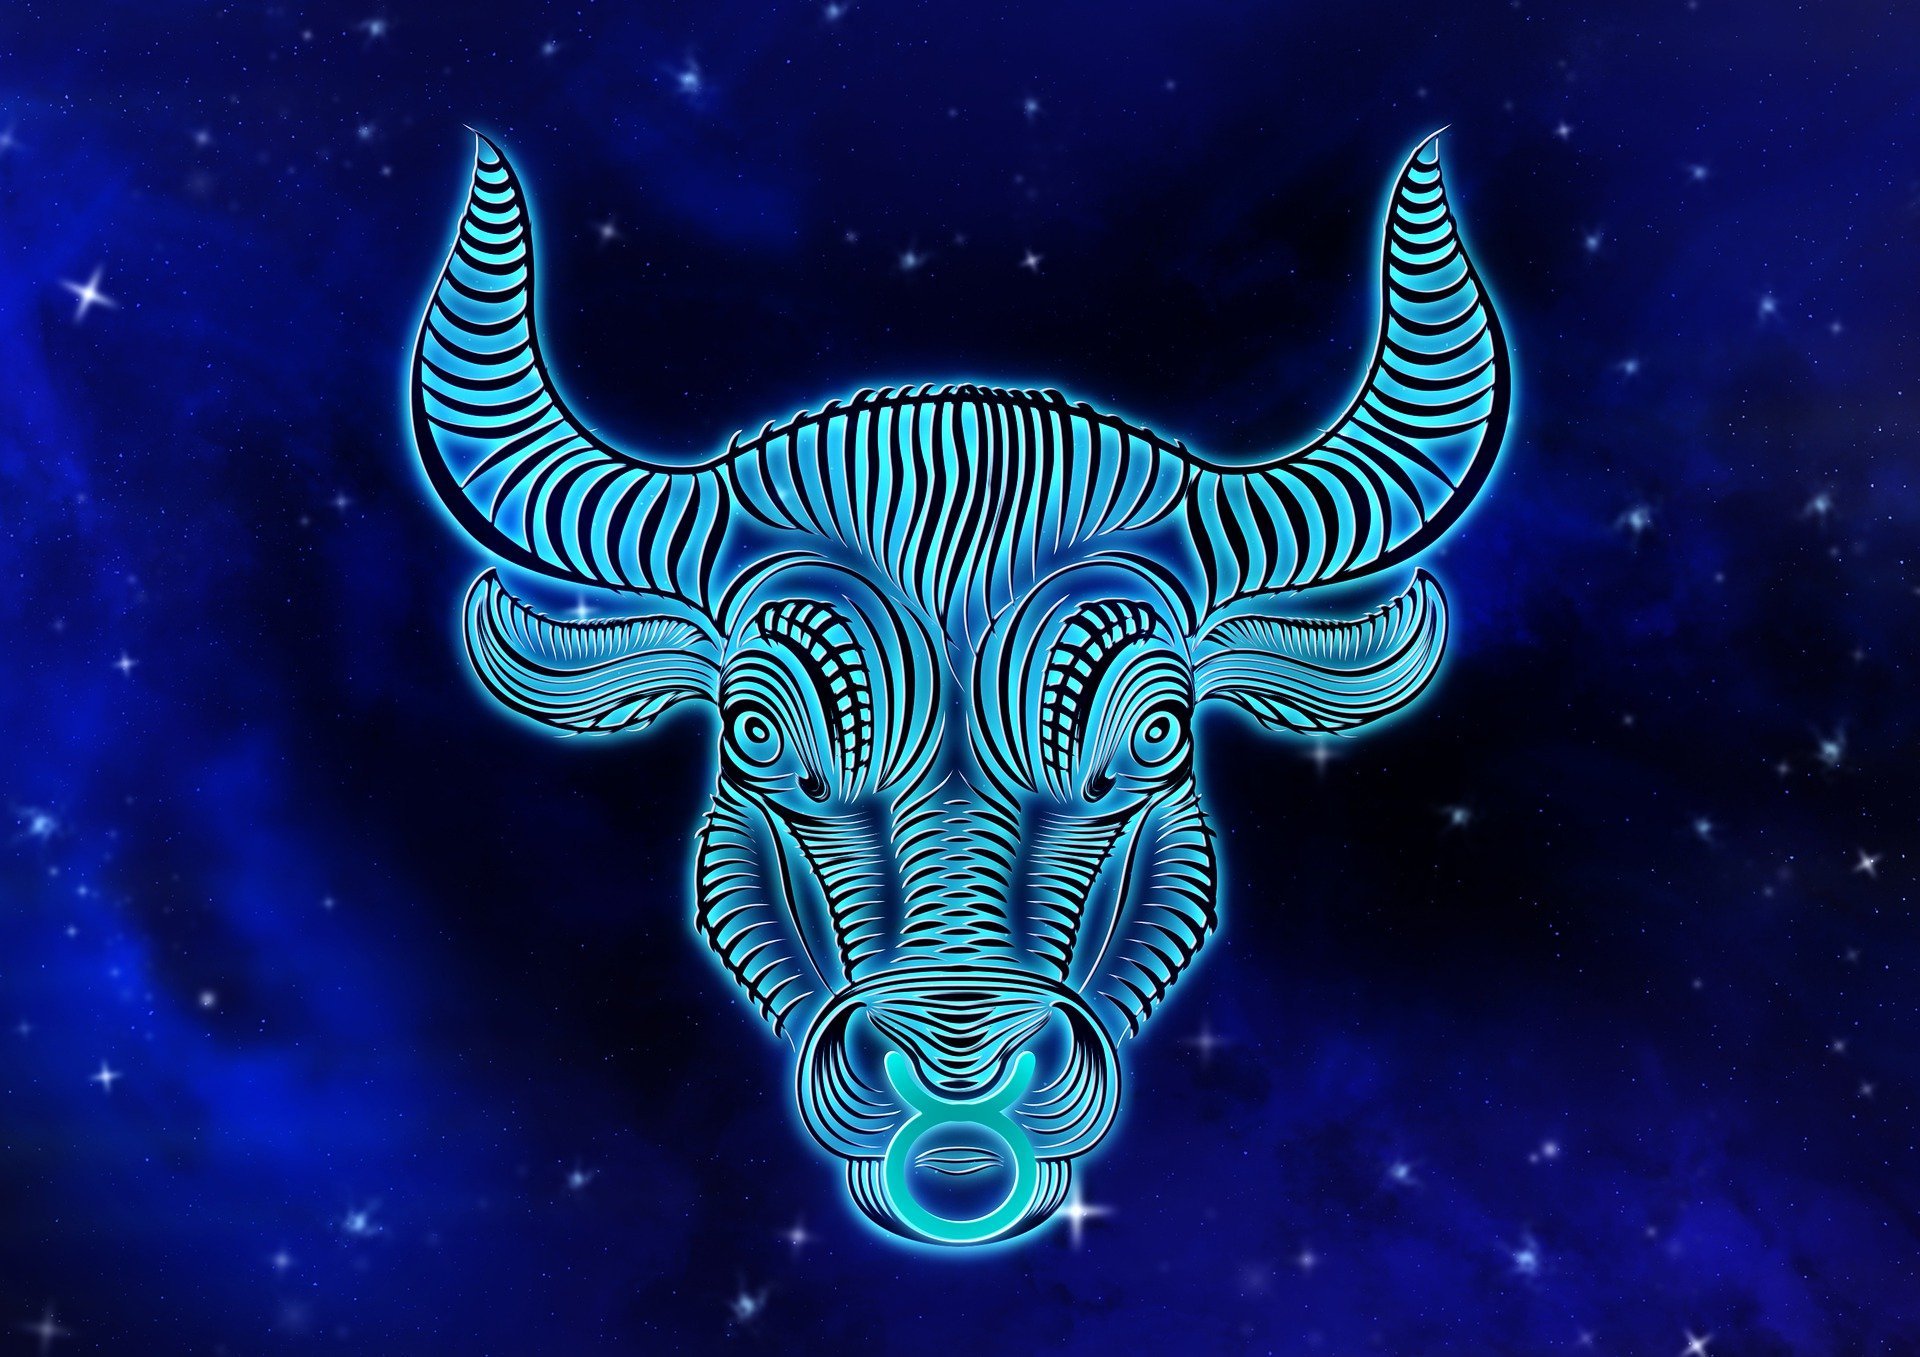 Pictured - A depiction of a Taurus star sign | Source: Pixabay 